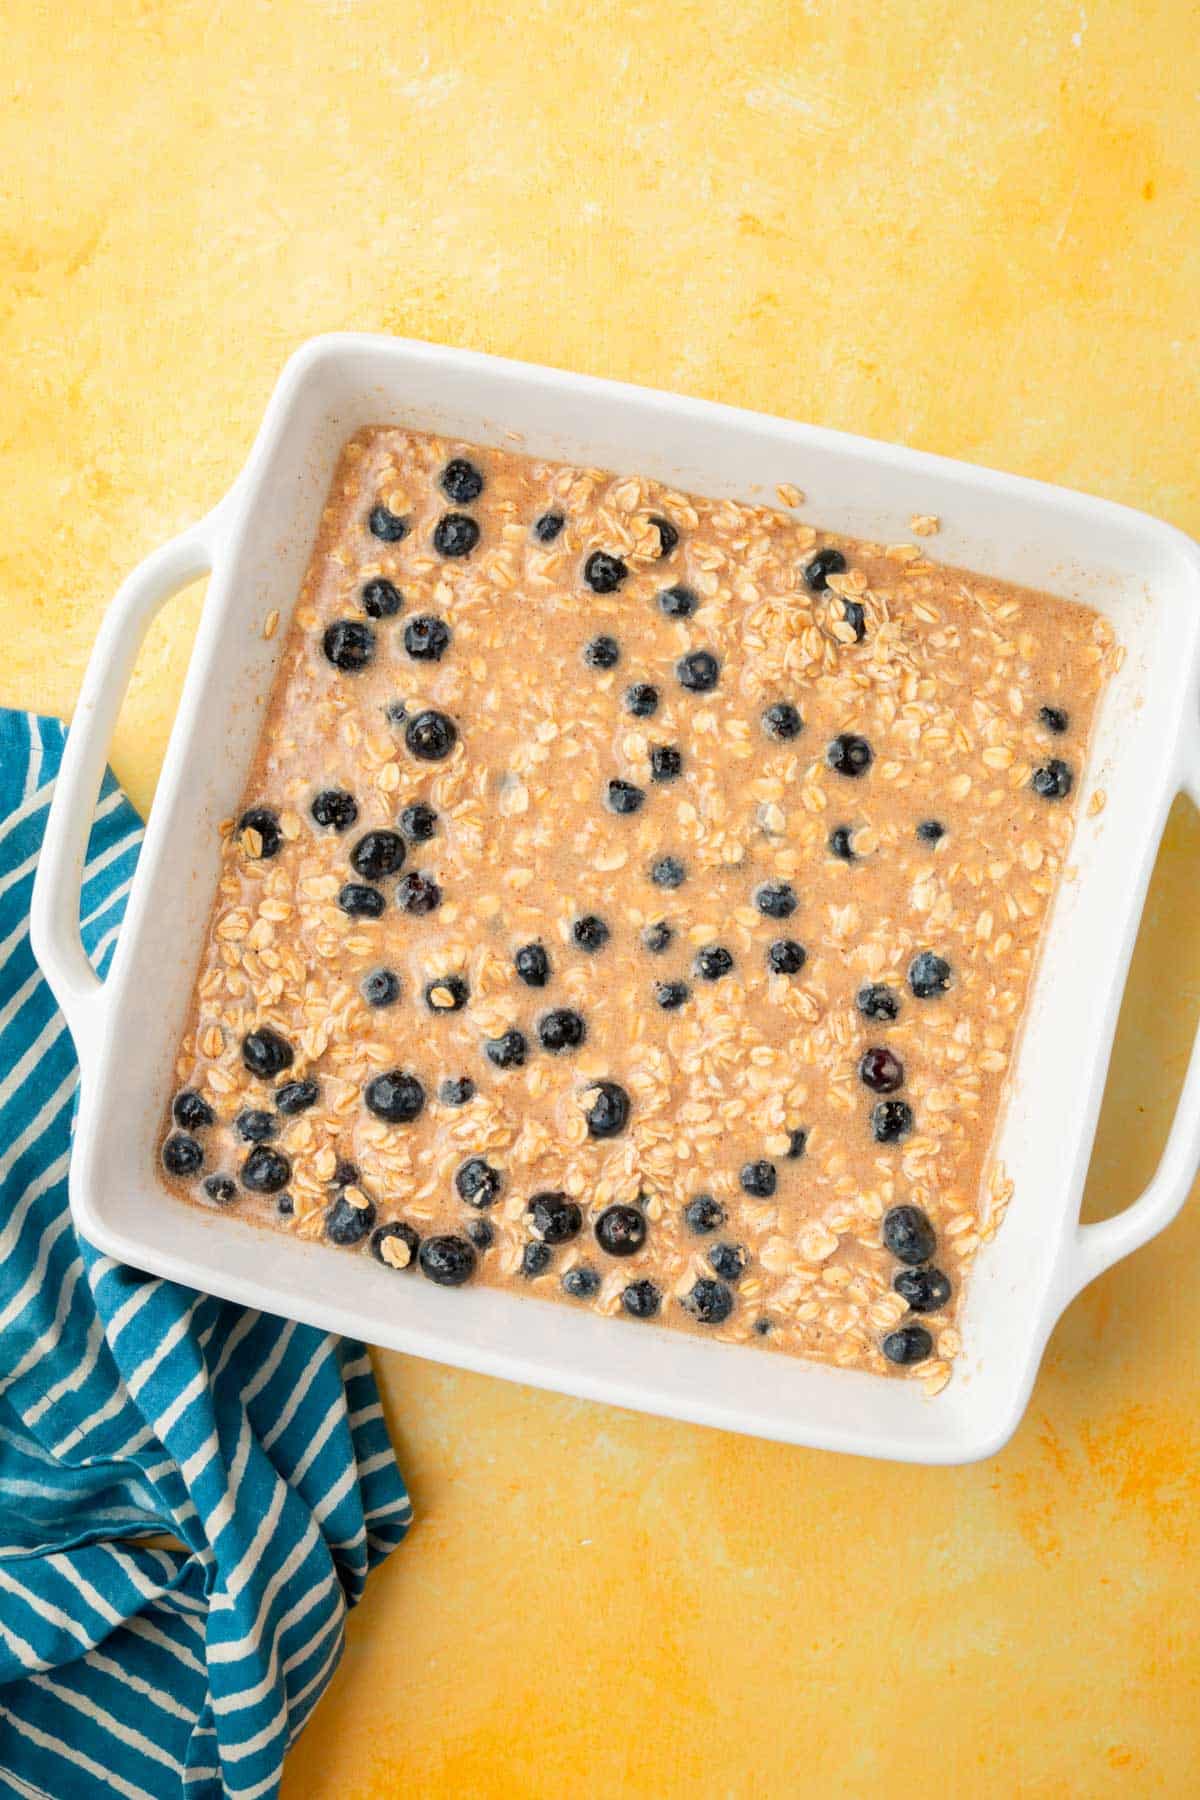 A wet mixture of almond milk, spices, oats, and blueberries in a square baking dish on a yellow table.